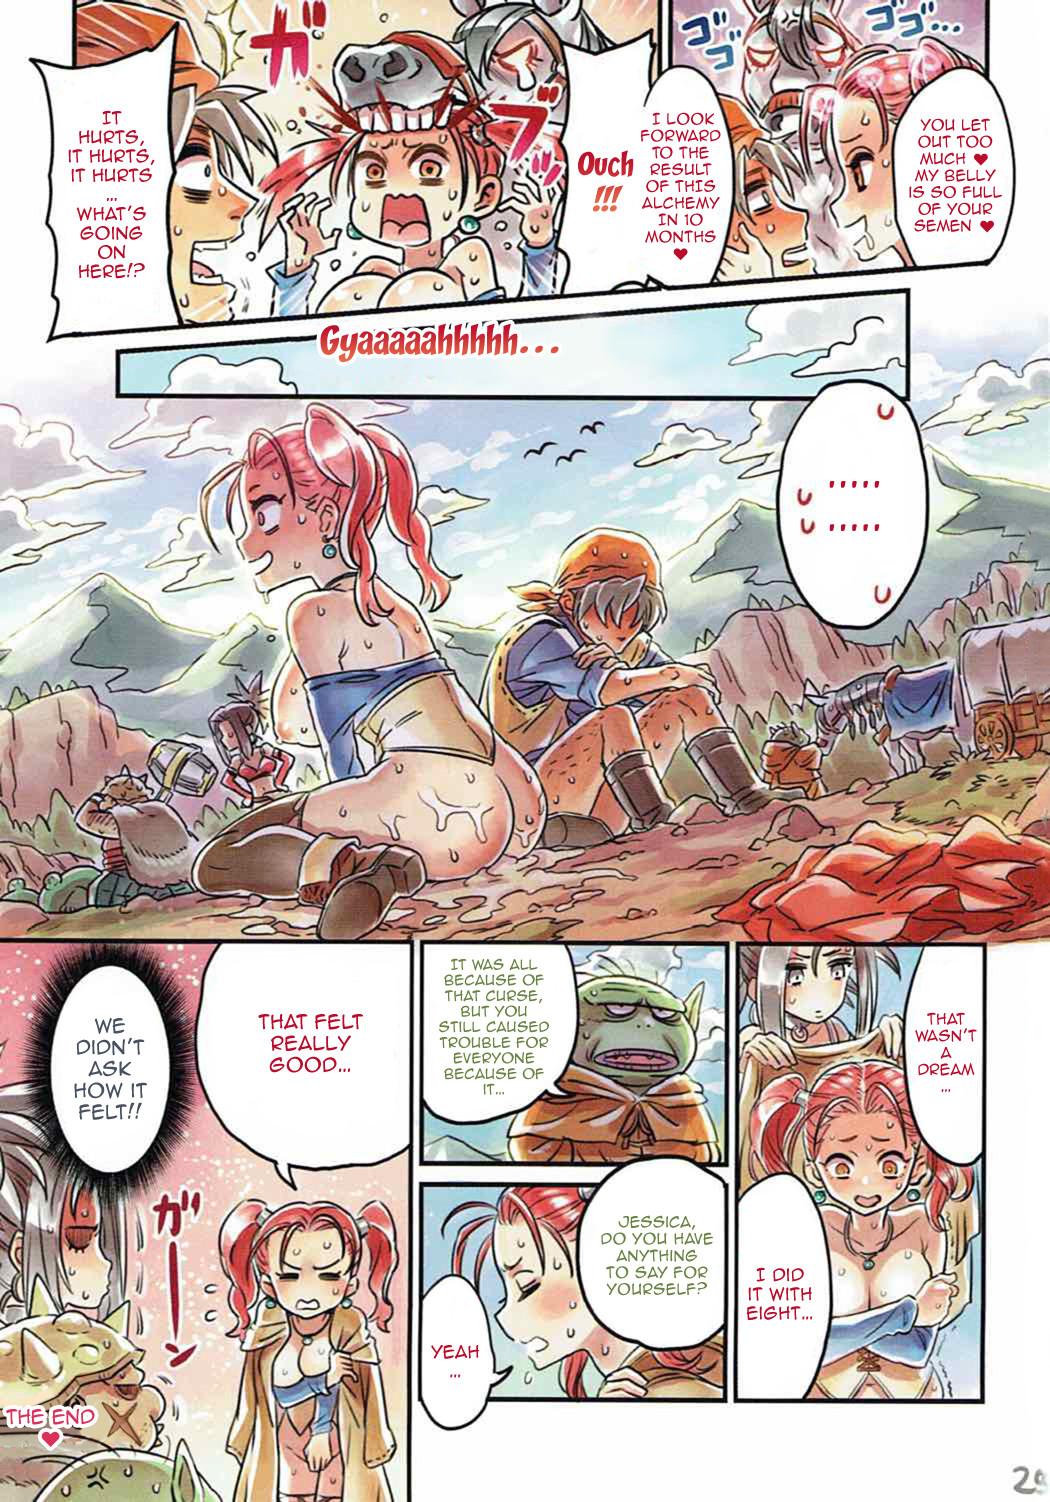 (C89) [Mimoneland (Mimonel)] Nakama to Issen Koechau Hon ~DQ Hen~ | A Book About Crossing The Line With Companions ~DQ Edition~ (Dragon Quest) [English] {Doujins.com} 23